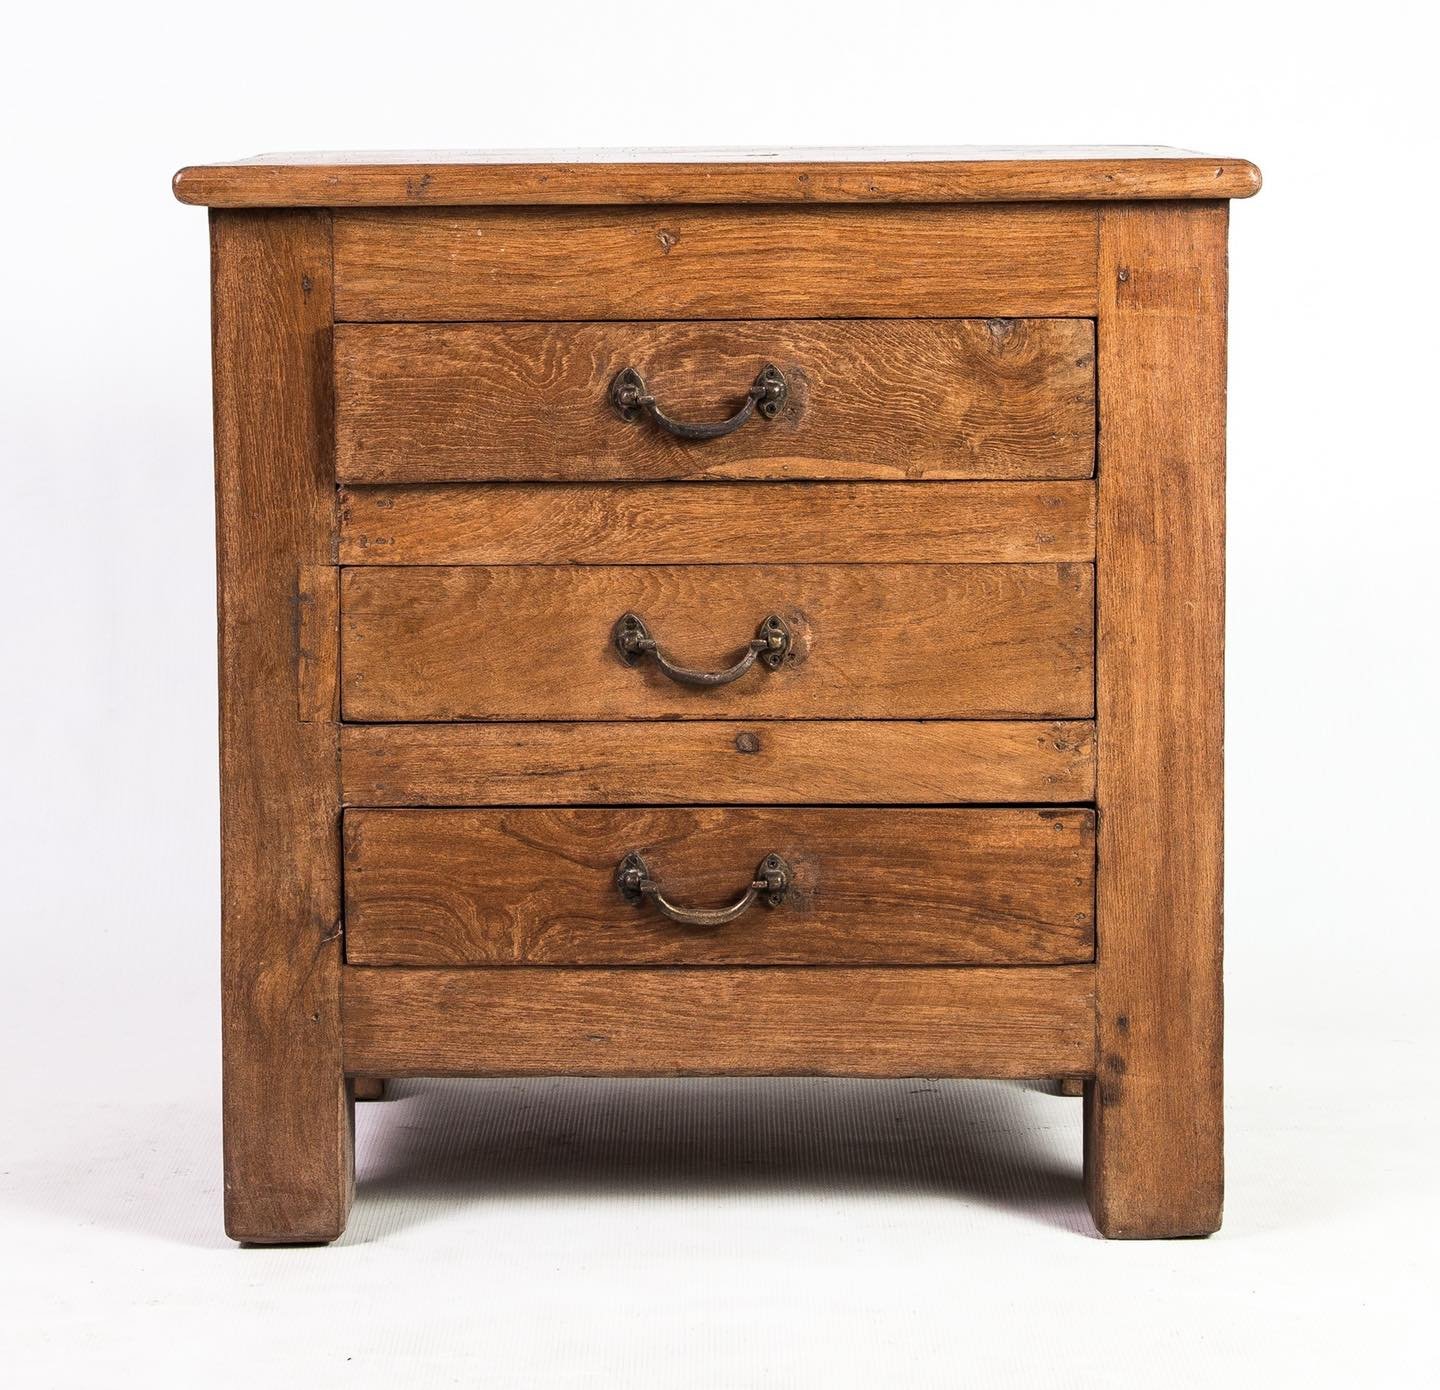 CTS2 TeakWood bedside Cabinet with Drawers